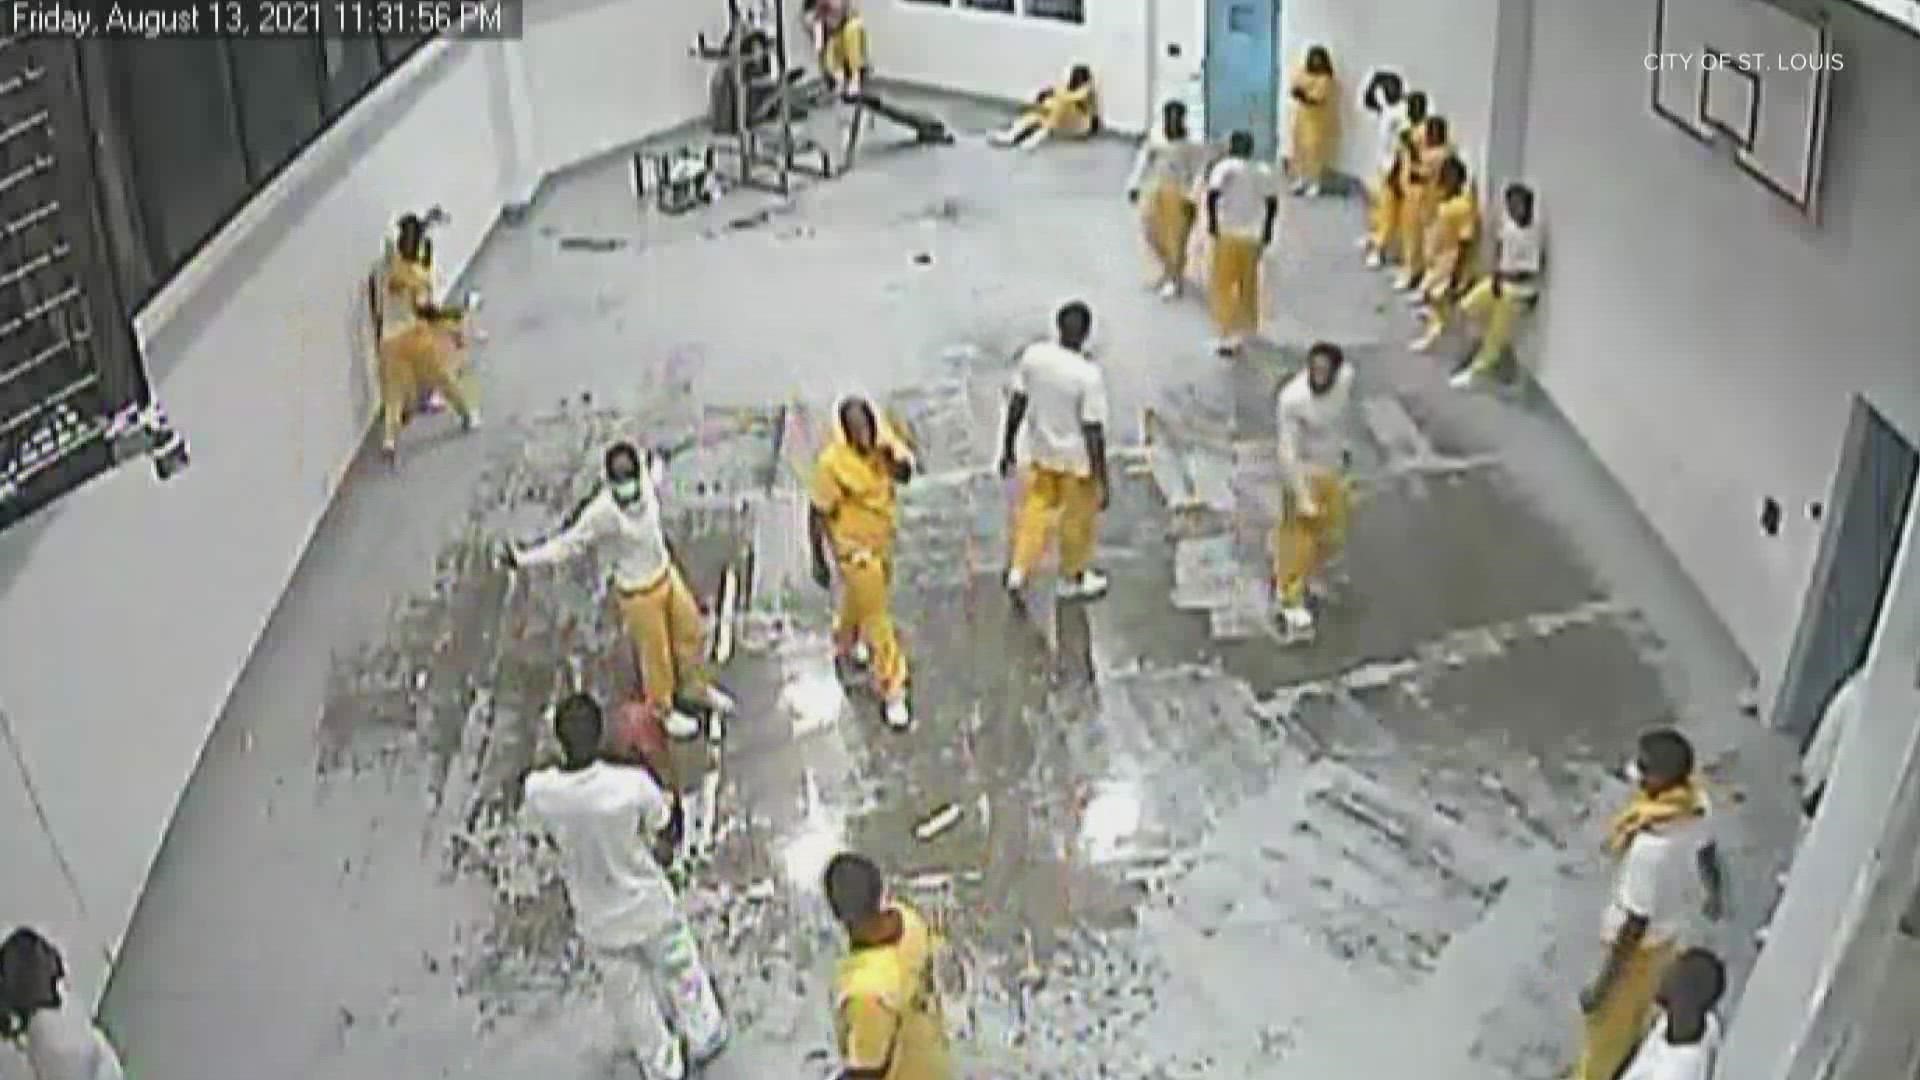 Video provided by the City of St. Louis shows an fight between detainees on Aug. 13, 2021